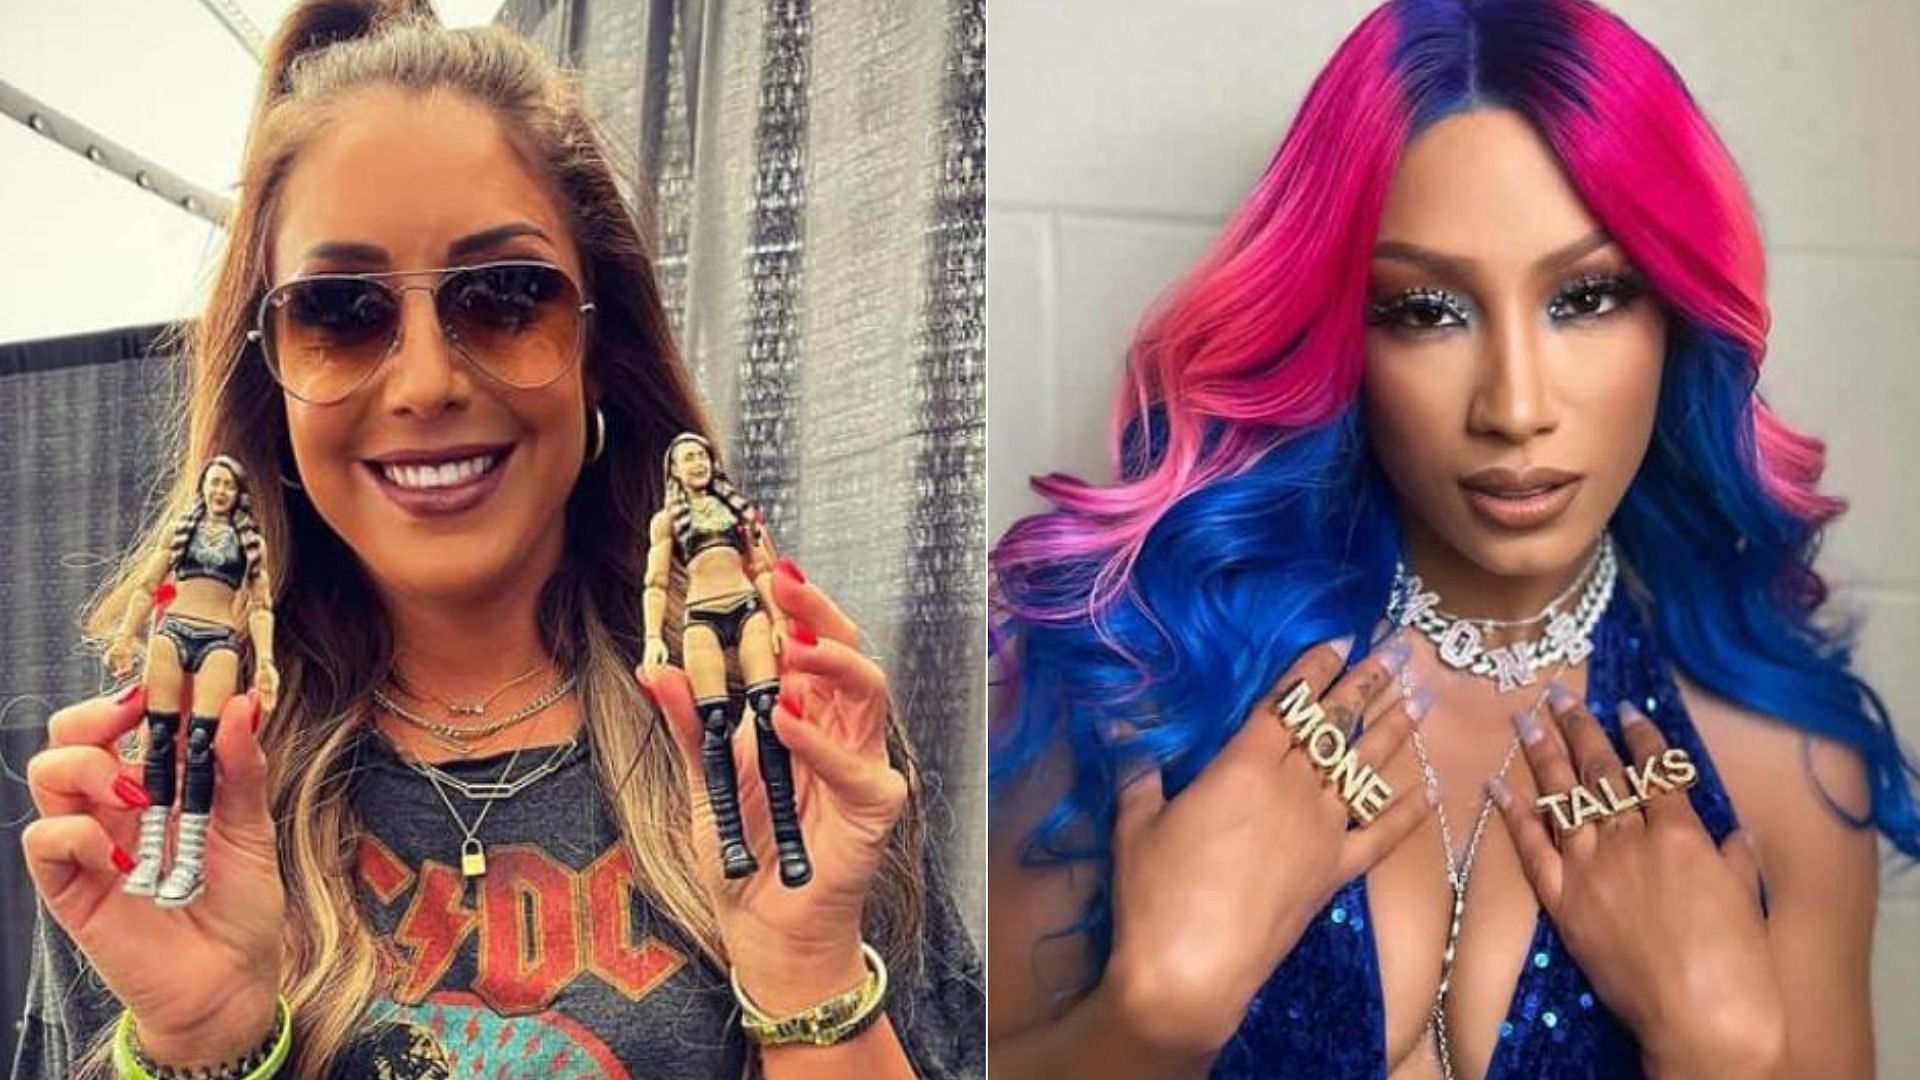 Britt Baker vs. Mercedes Mone for the TBS Championship seems to be the plan for All In. [Image credits: the stars&#039; Instagram account]